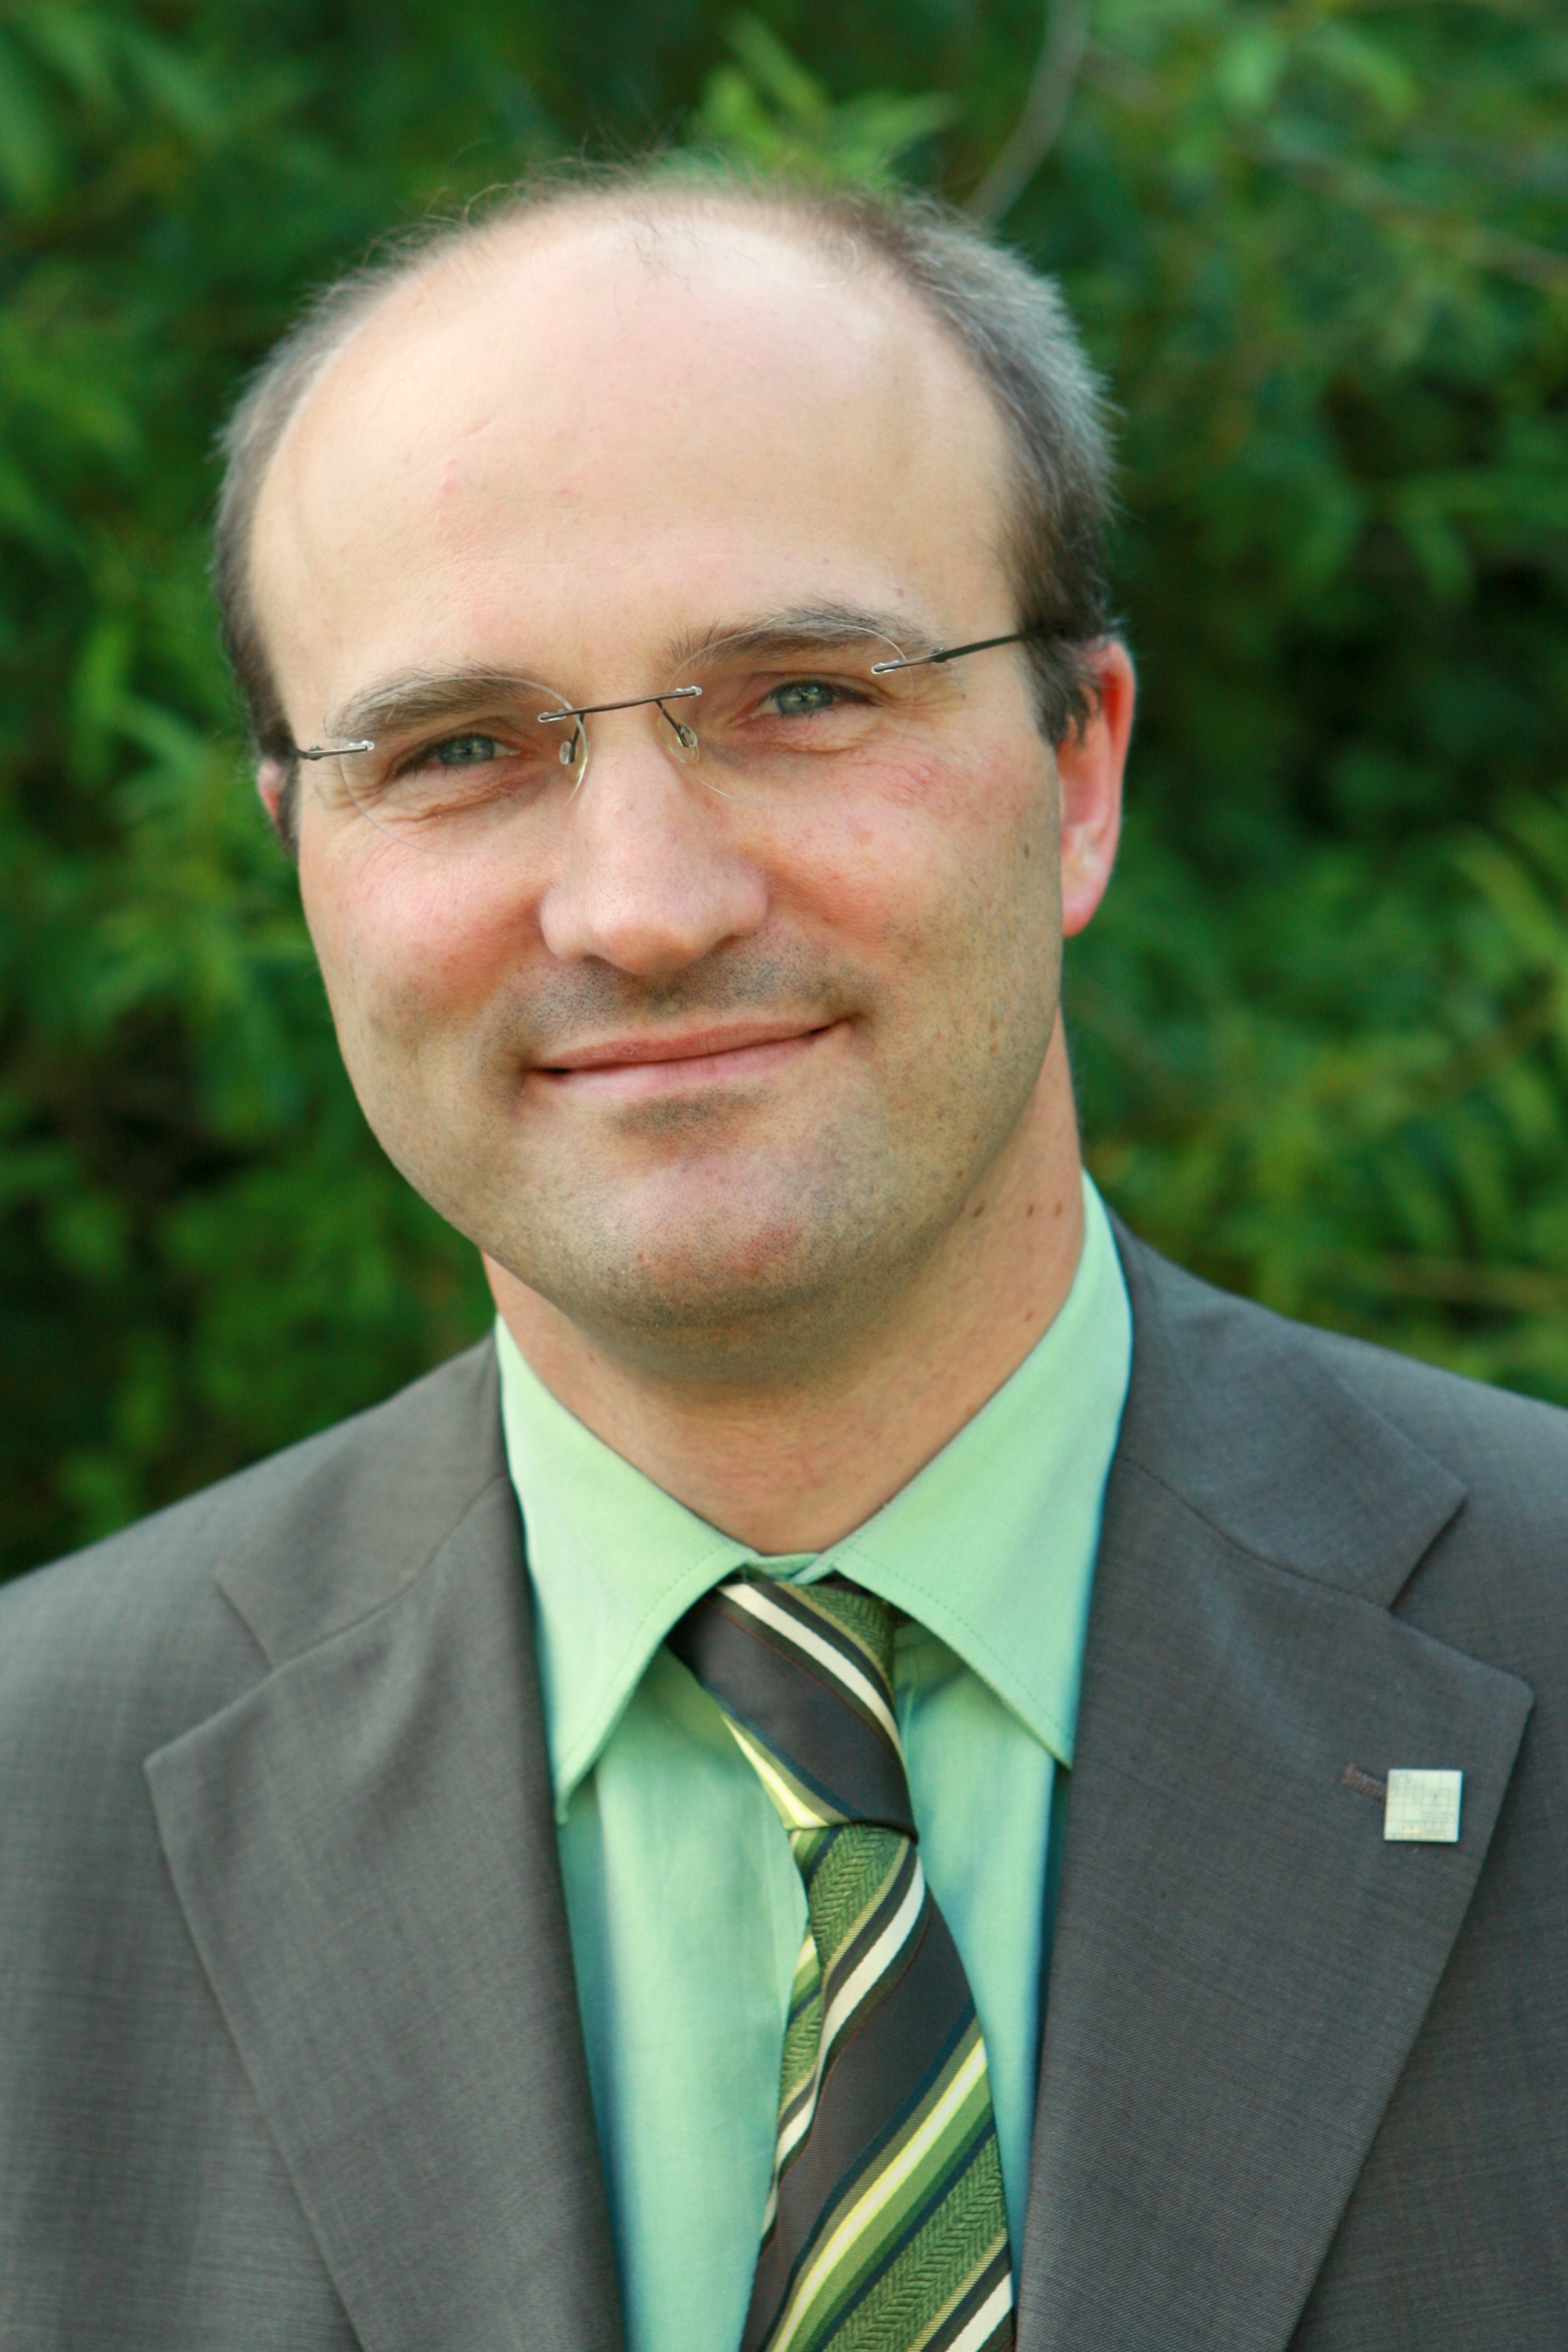 Pro-rector of the University of Constance: Prof. Dr. Ulrich Rüdiger (Photo: University of Constance)